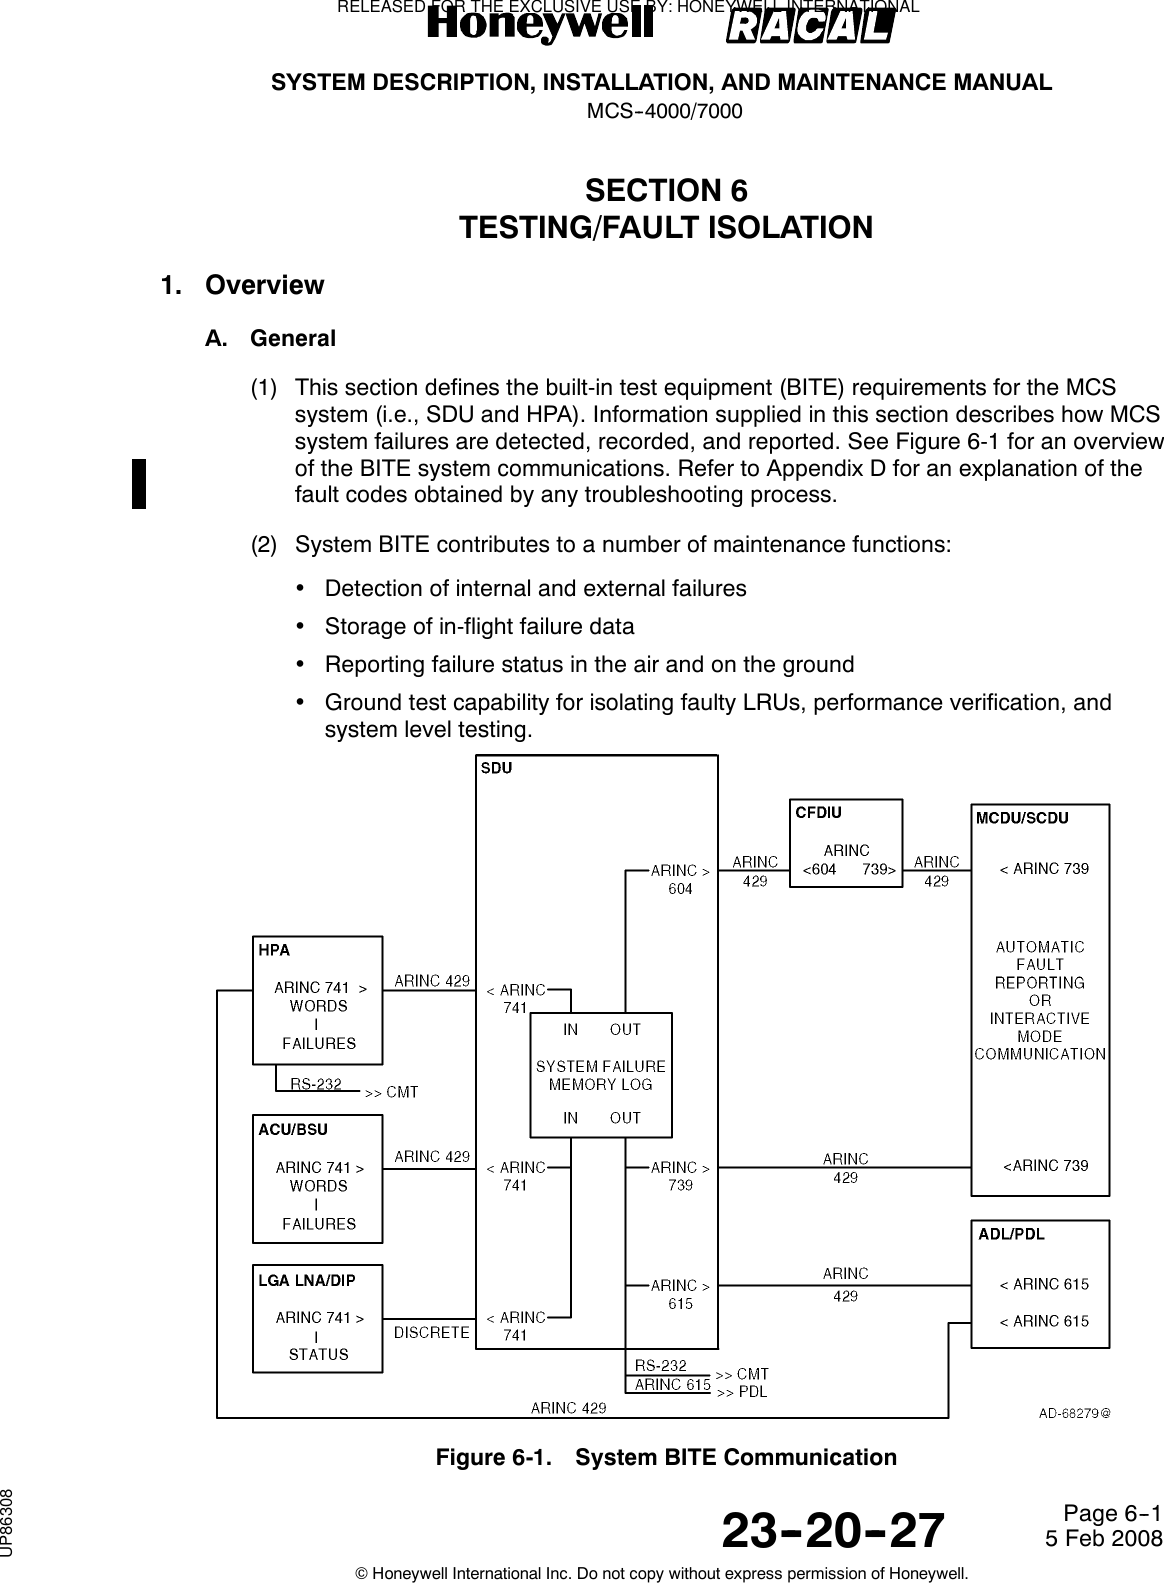 SYSTEM DESCRIPTION, INSTALLATION, AND MAINTENANCE MANUALMCS--4000/700023--20--27 5 Feb 2008©Honeywell International Inc. Do not copy without express permission of Honeywell.Page 6--1SECTION 6TESTING/FAULT ISOLATION1. OverviewA. General(1) This section defines the built-in test equipment (BITE) requirements for the MCSsystem (i.e., SDU and HPA). Information supplied in this section describes how MCSsystem failures are detected, recorded, and reported. See Figure 6-1 for an overviewof the BITE system communications. Refer to Appendix D for an explanation of thefault codes obtained by any troubleshooting process.(2) System BITE contributes to a number of maintenance functions:•Detection of internal and external failures•Storage of in-flight failure data•Reporting failure status in the air and on the ground•Ground test capability for isolating faulty LRUs, performance verification, andsystem level testing.Figure 6-1. System BITE CommunicationRELEASED FOR THE EXCLUSIVE USE BY: HONEYWELL INTERNATIONALUP86308